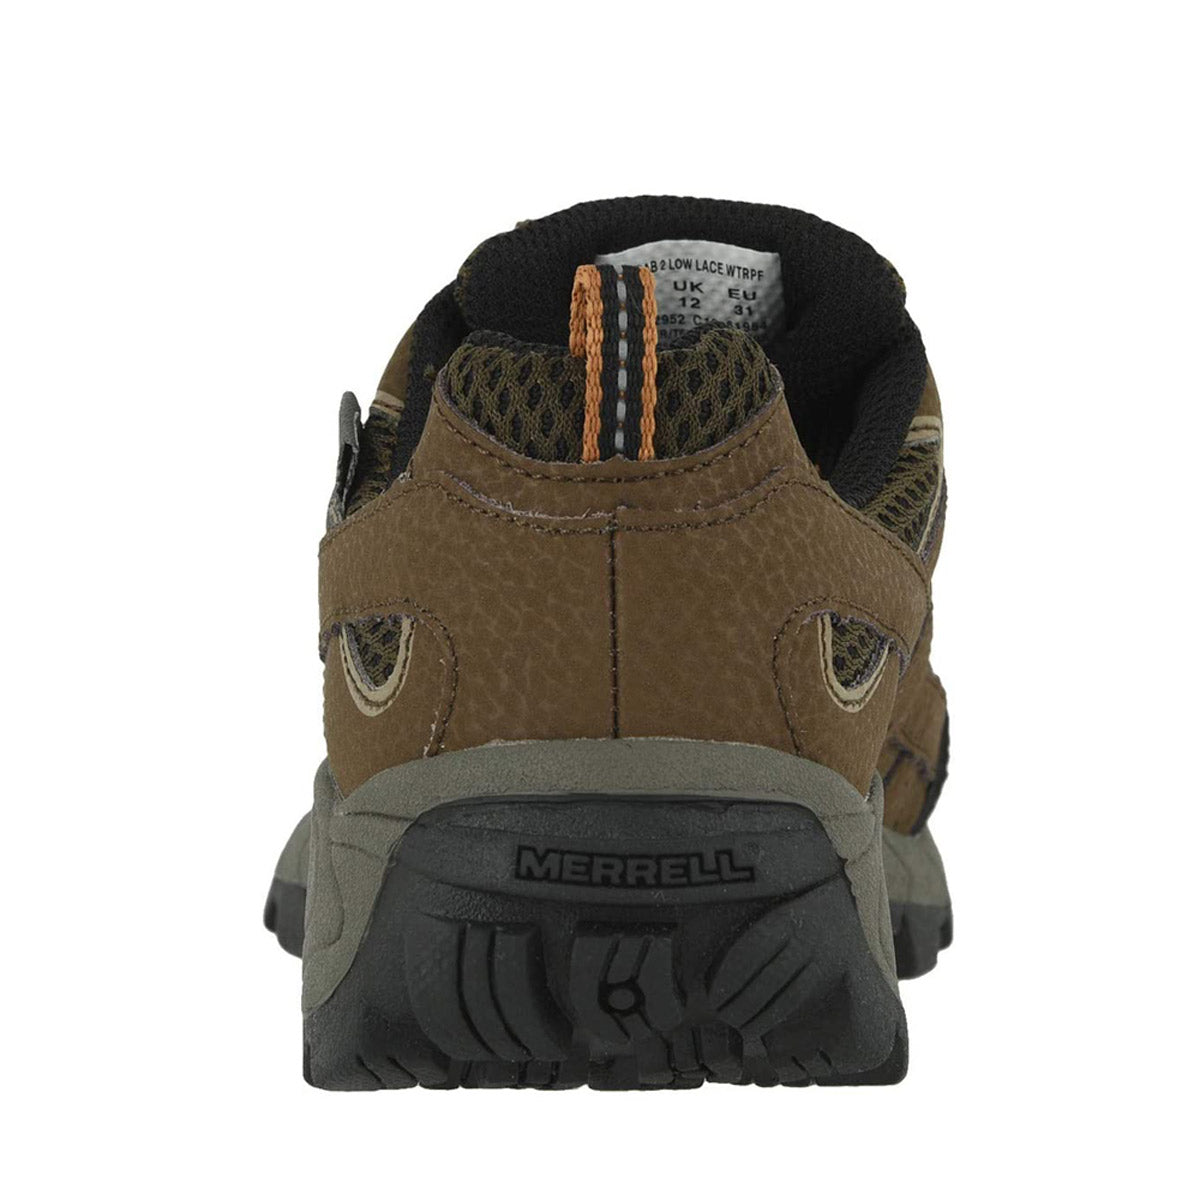 Rear view of a brown Merrell Moab 2 Low Lace waterproof Earth hiking shoe showing the heel, tread design, and brand logo.